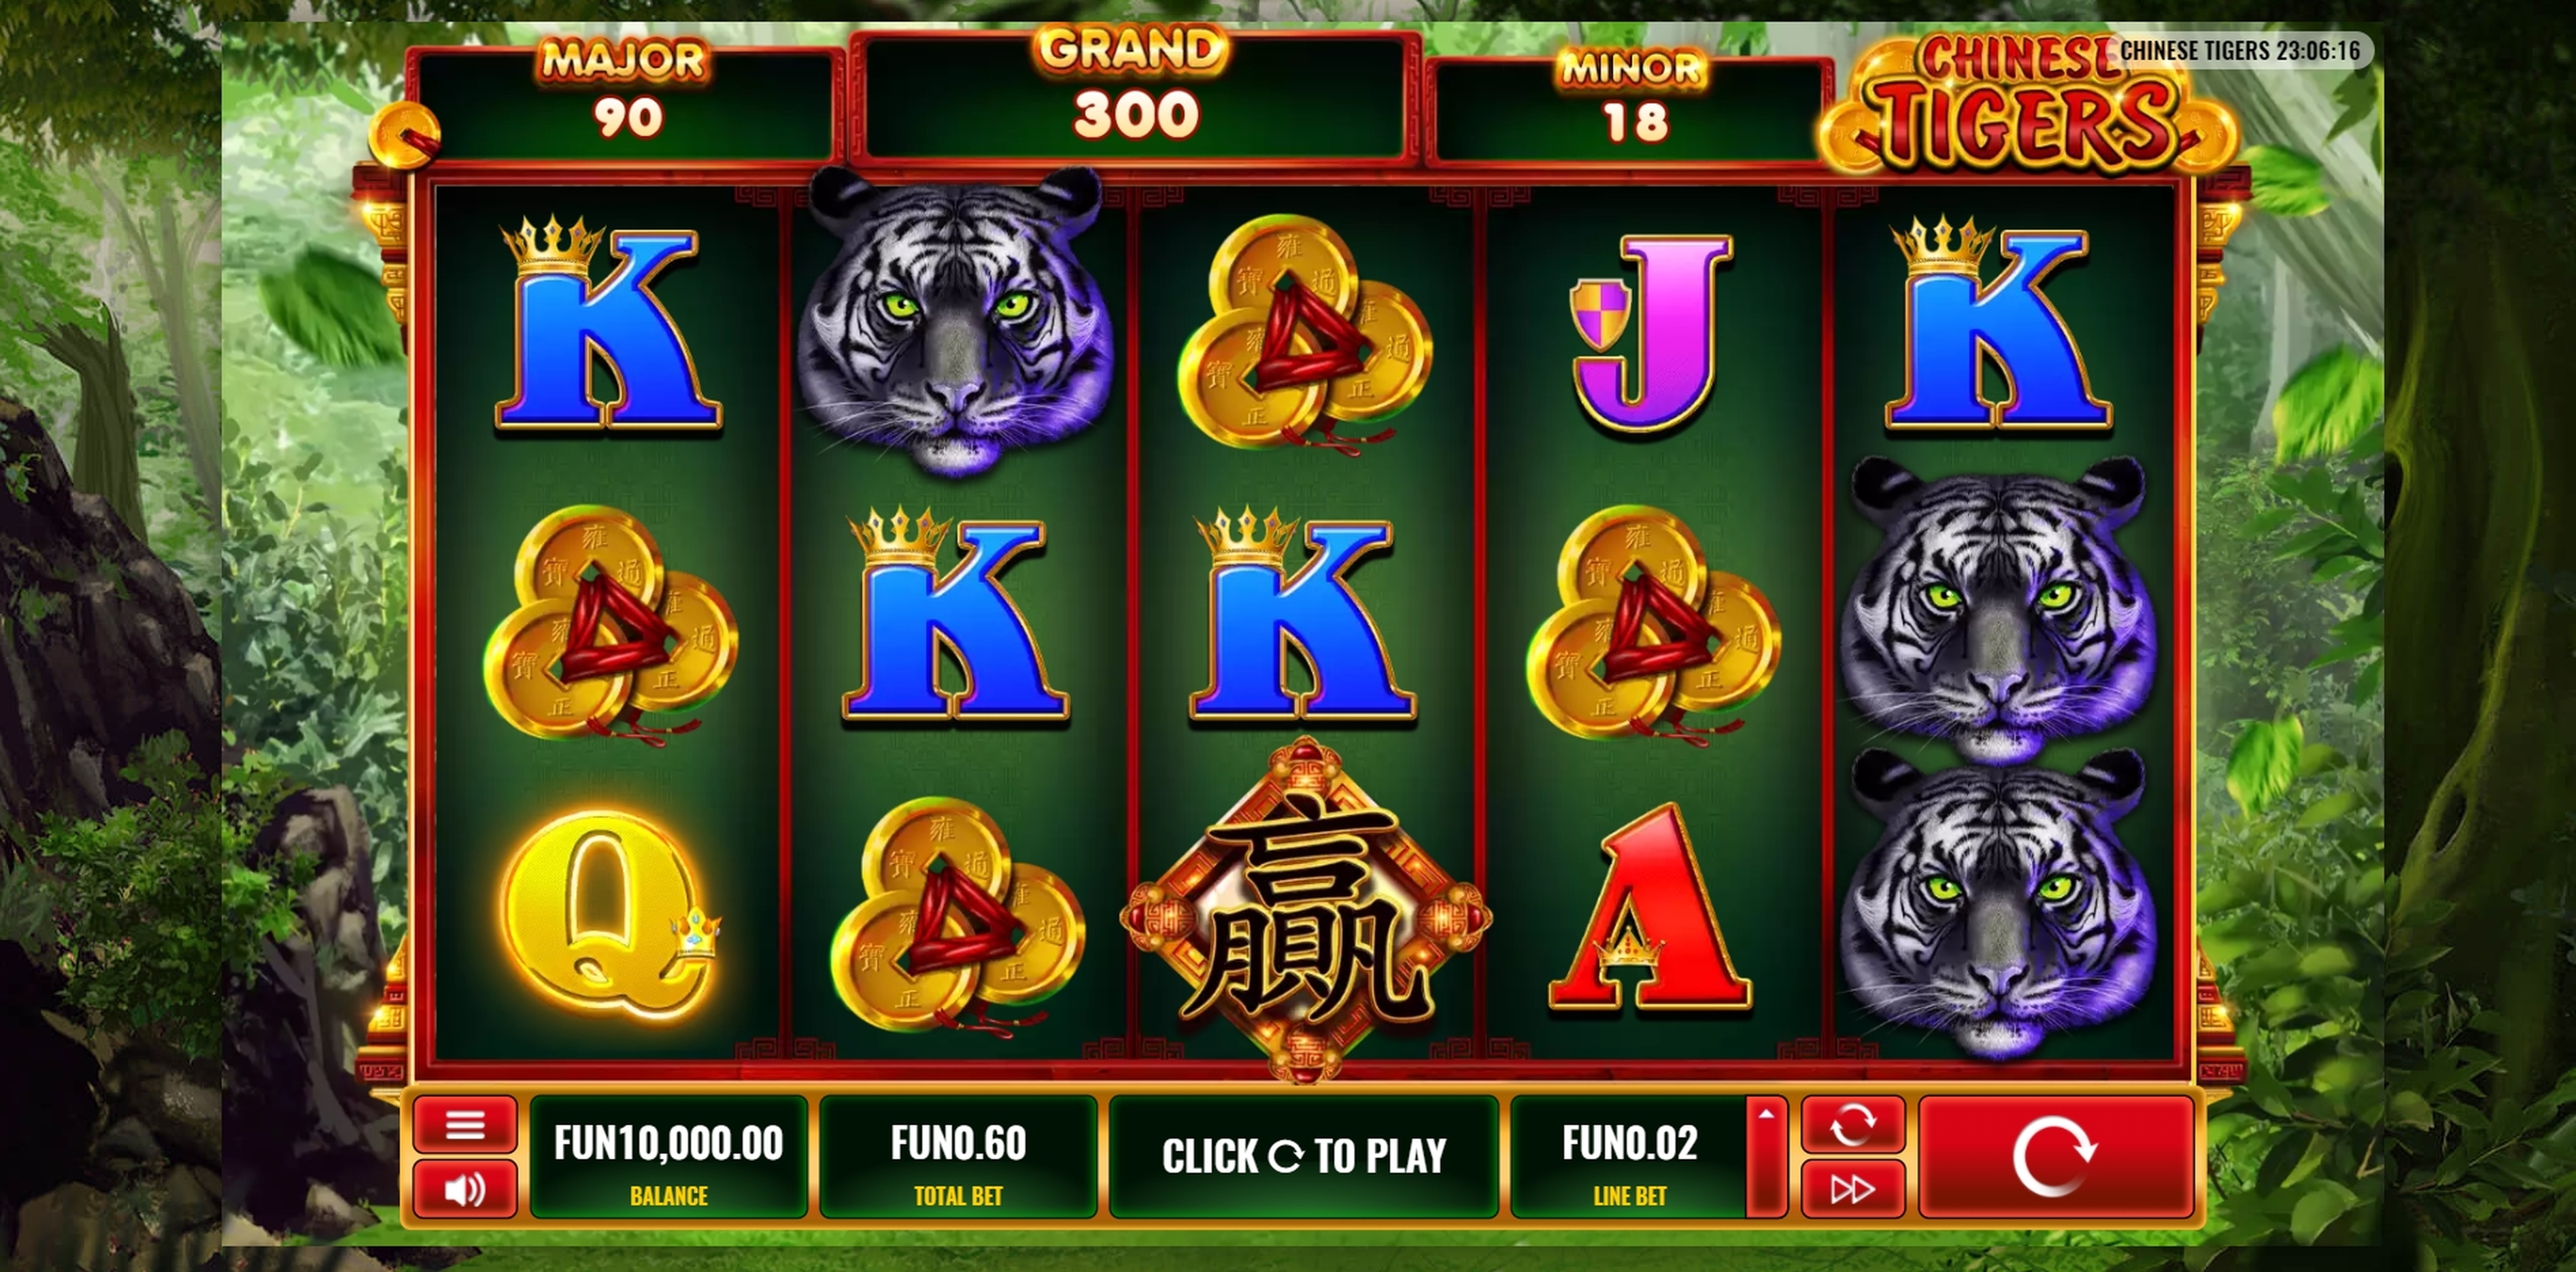 Reels in Chinese Tigers Slot Game by Platipus